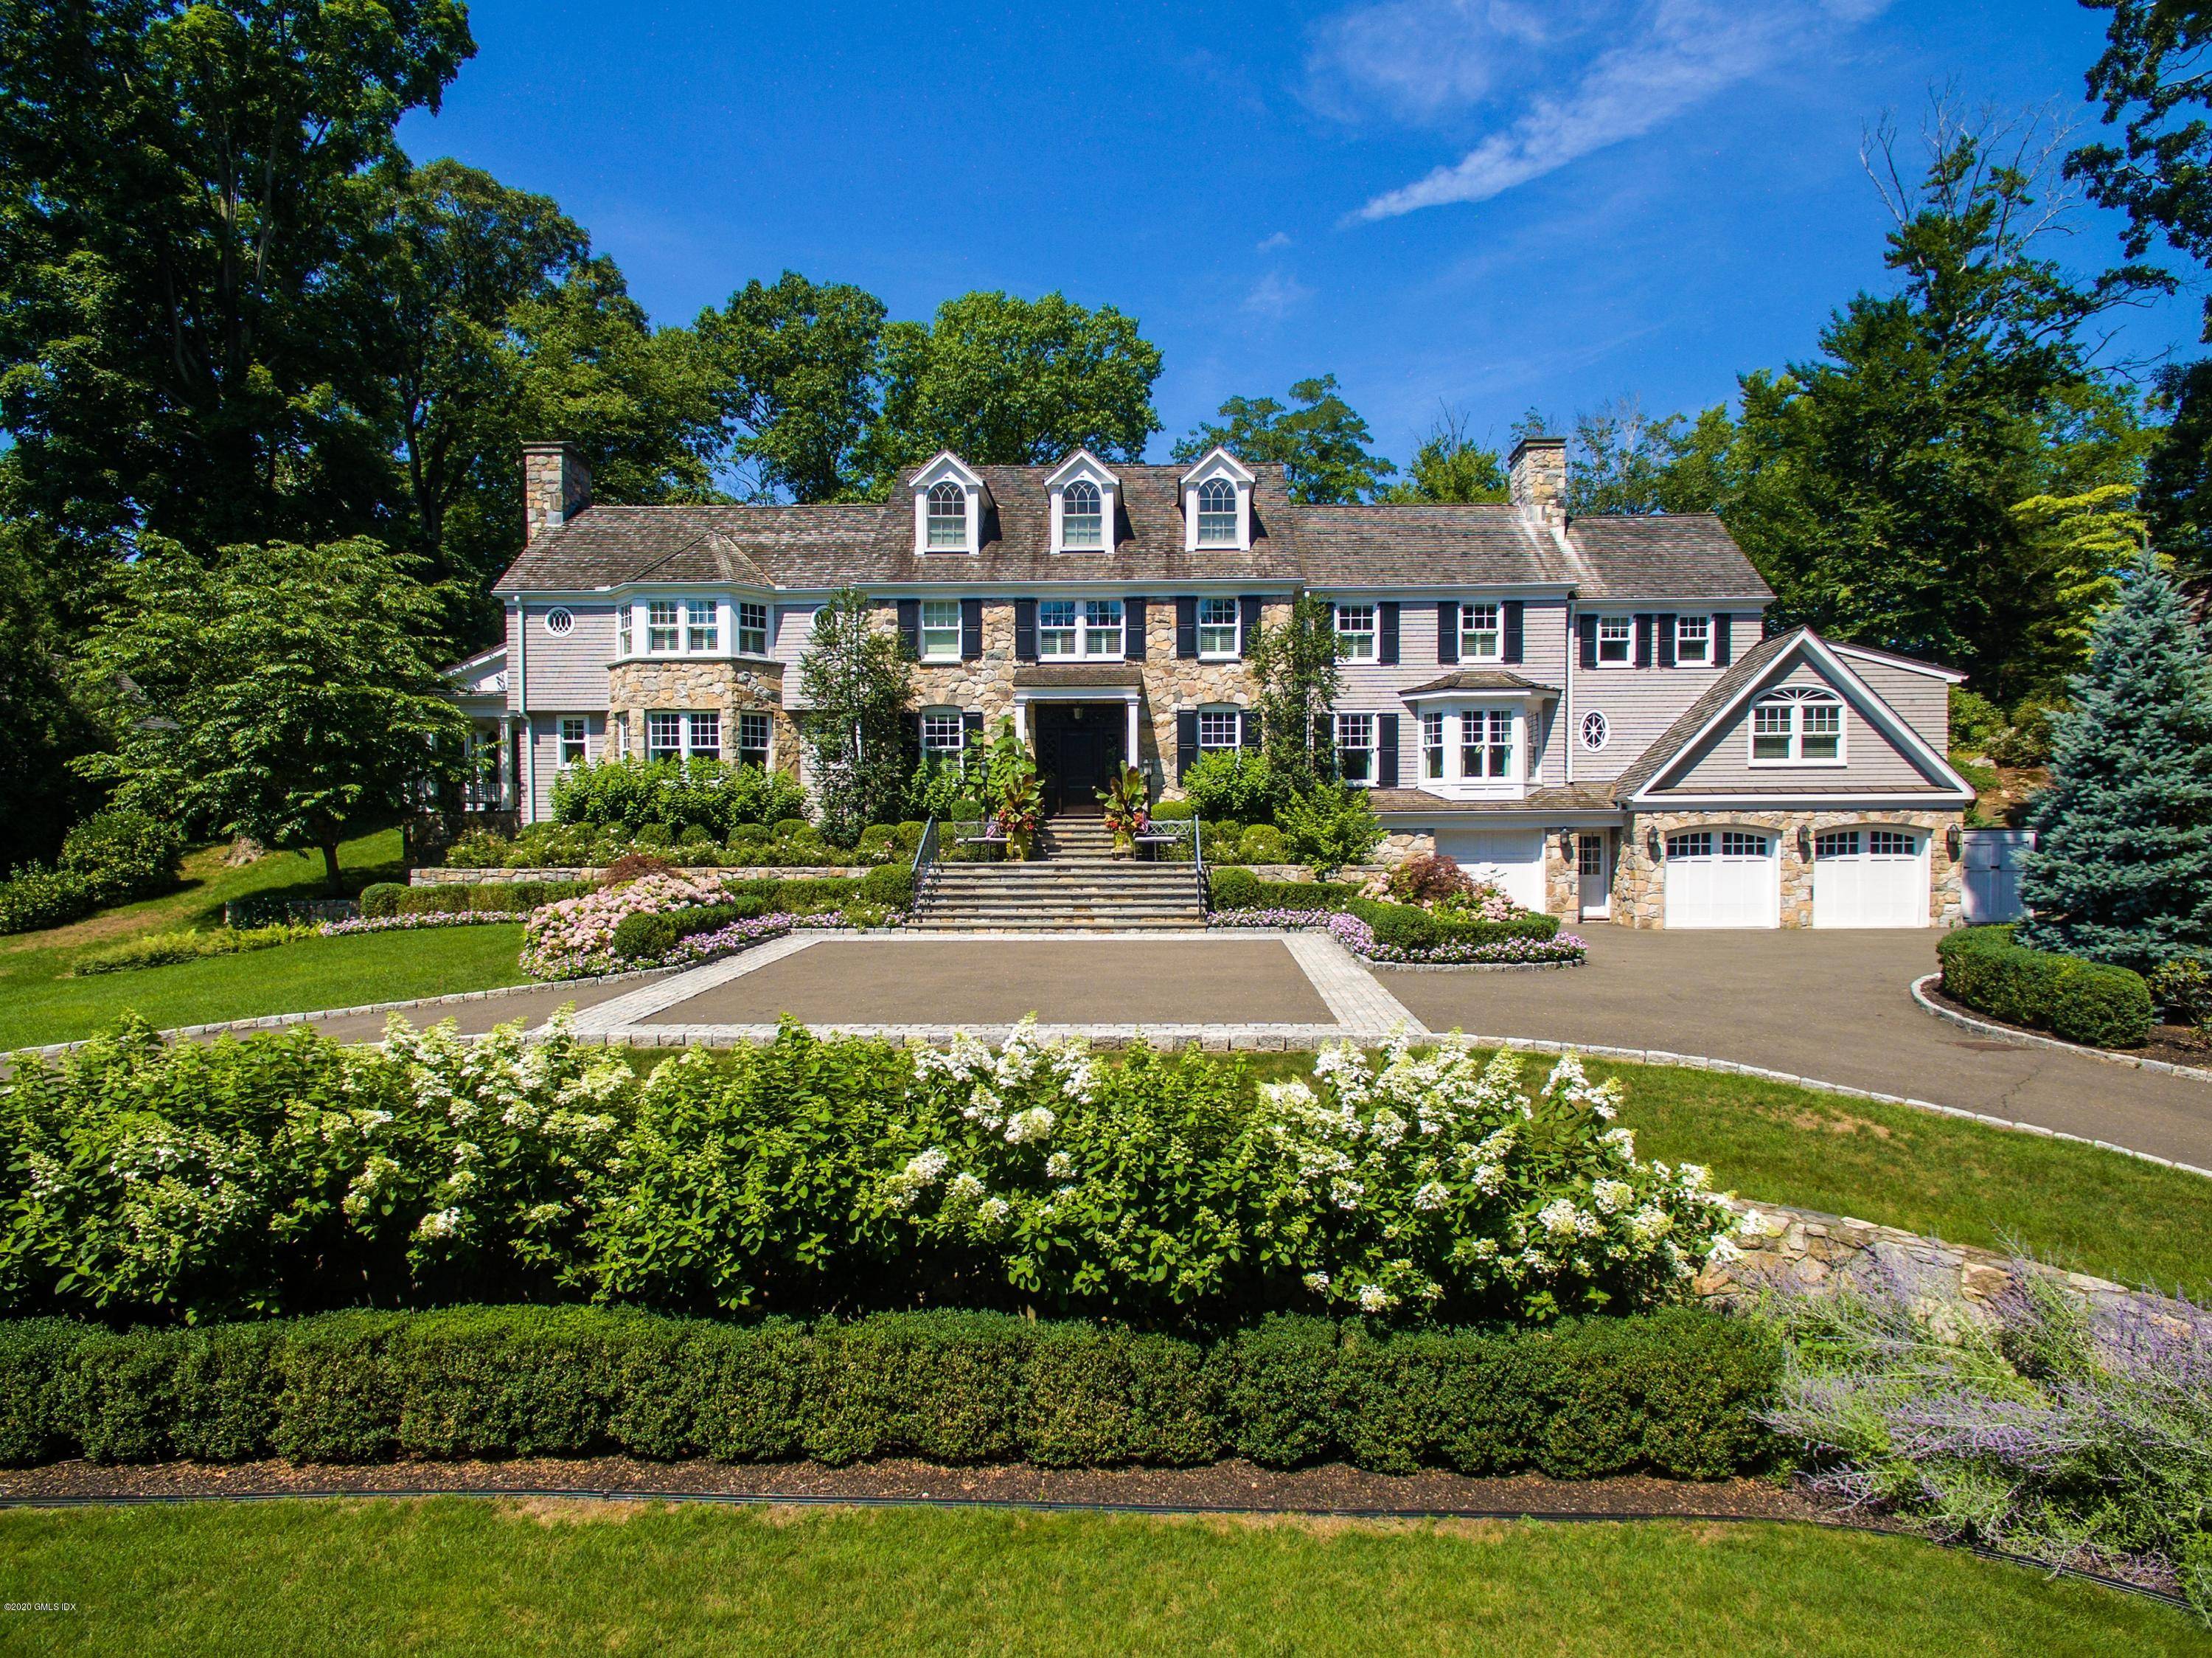 Stunning six bedroom Colonial epitomizes modern sophistication set atop a manicured.